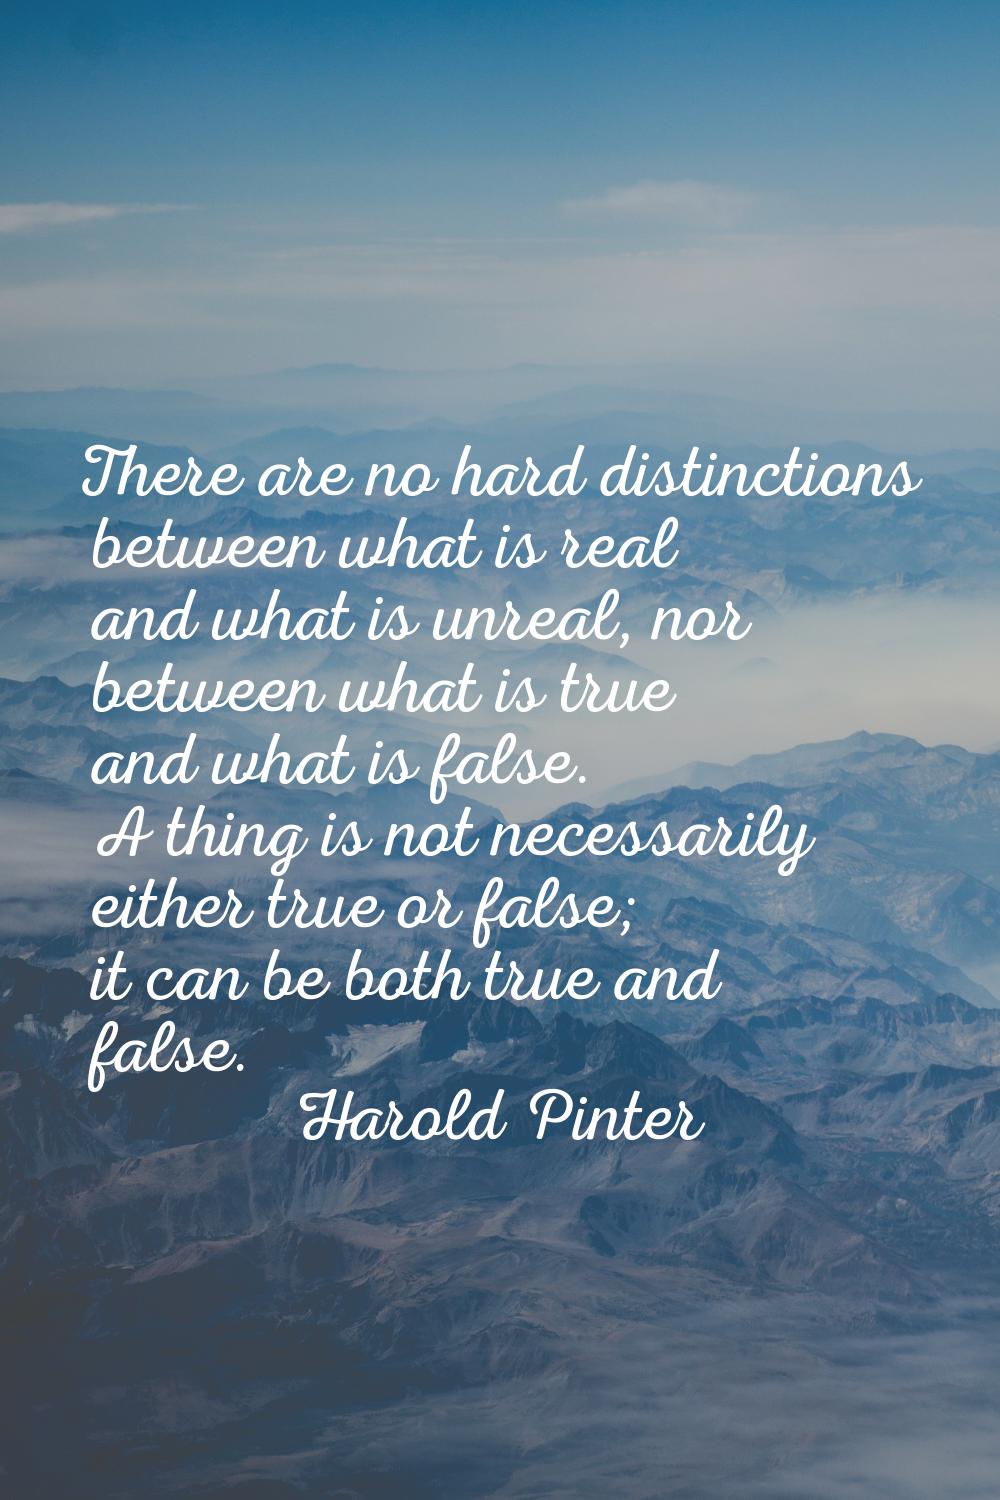 There are no hard distinctions between what is real and what is unreal, nor between what is true an